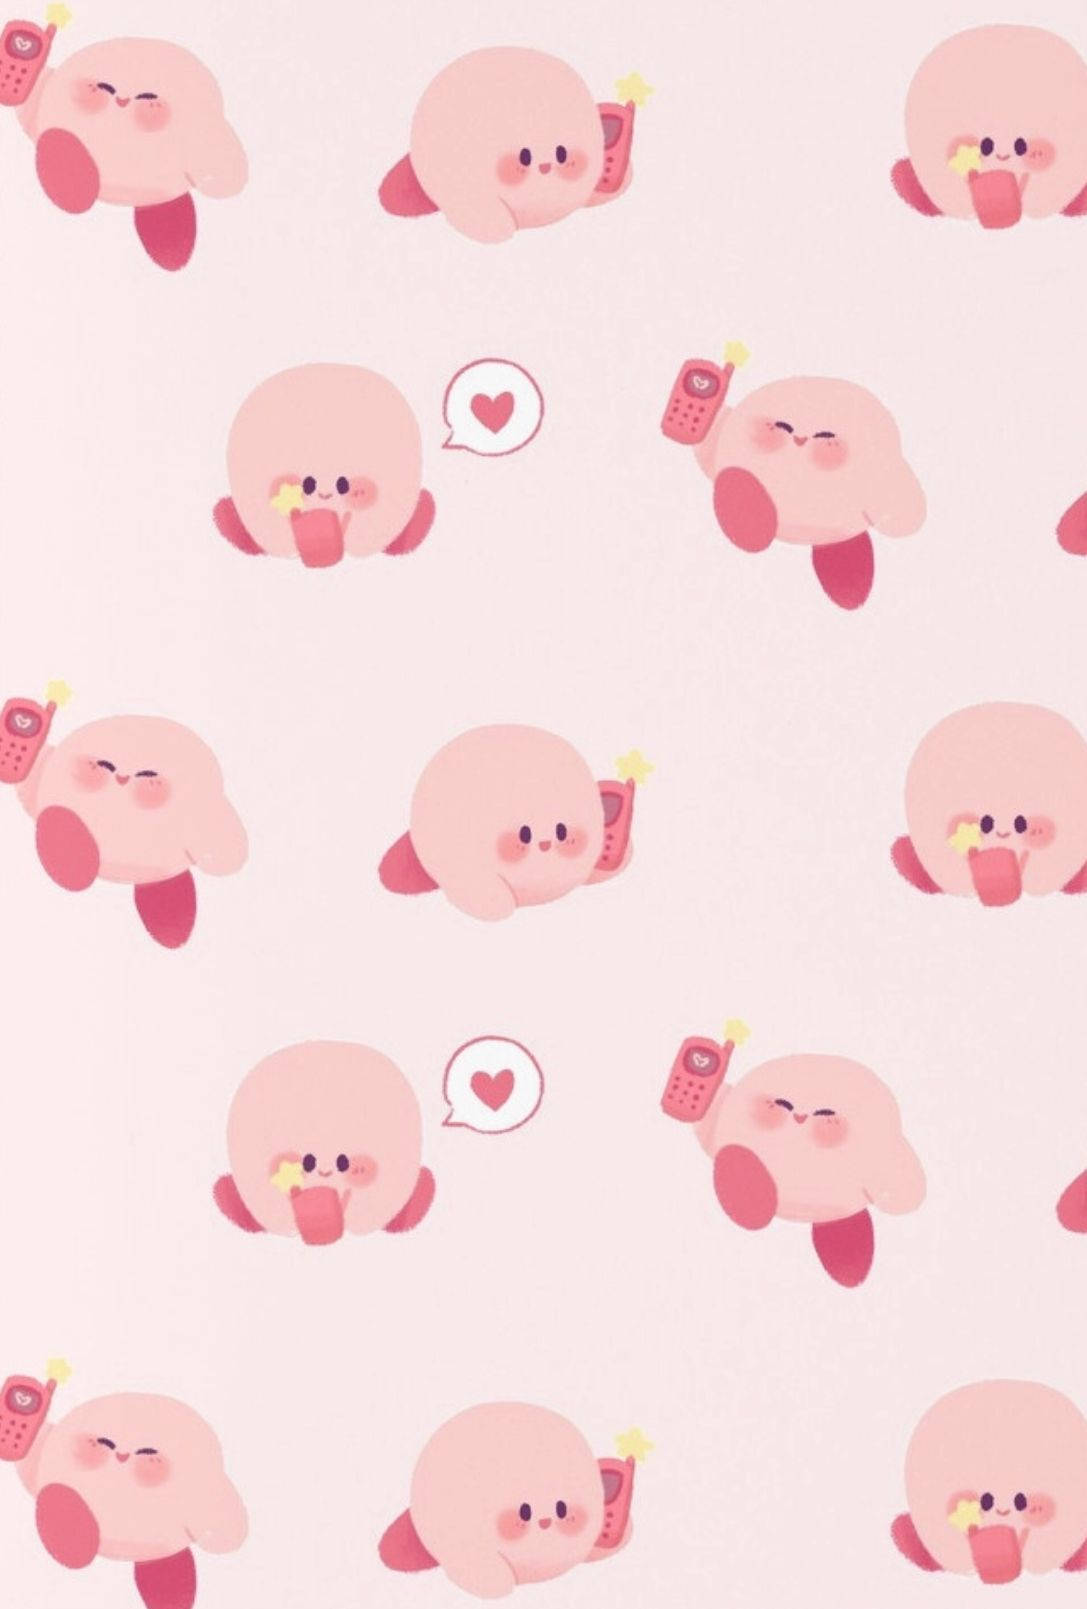 Kirby 1087X1609 Wallpaper and Background Image